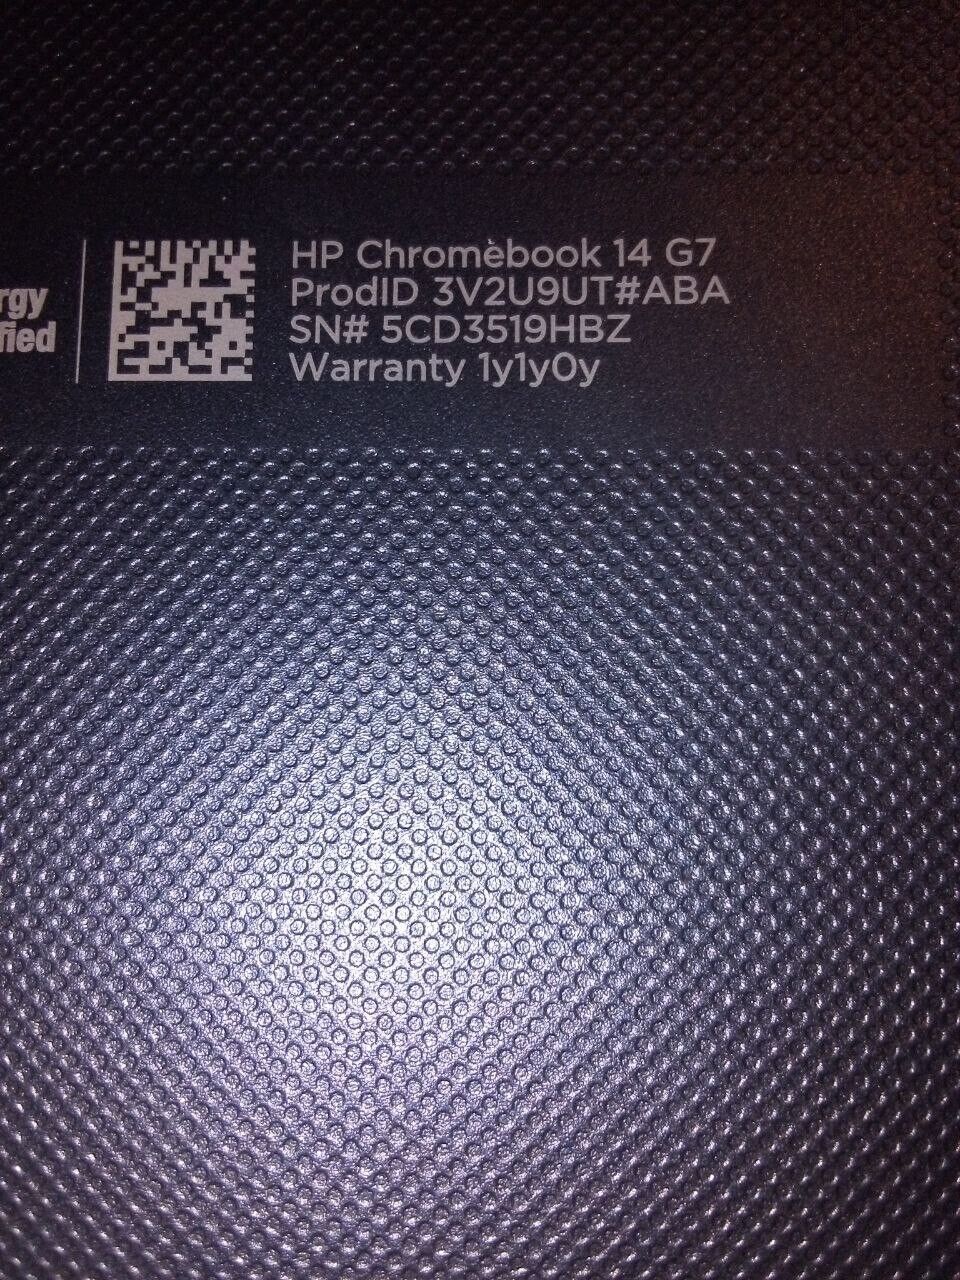 Never Used Brand New HP Chromebook 14 G7 With Bag And Adapter Charger 